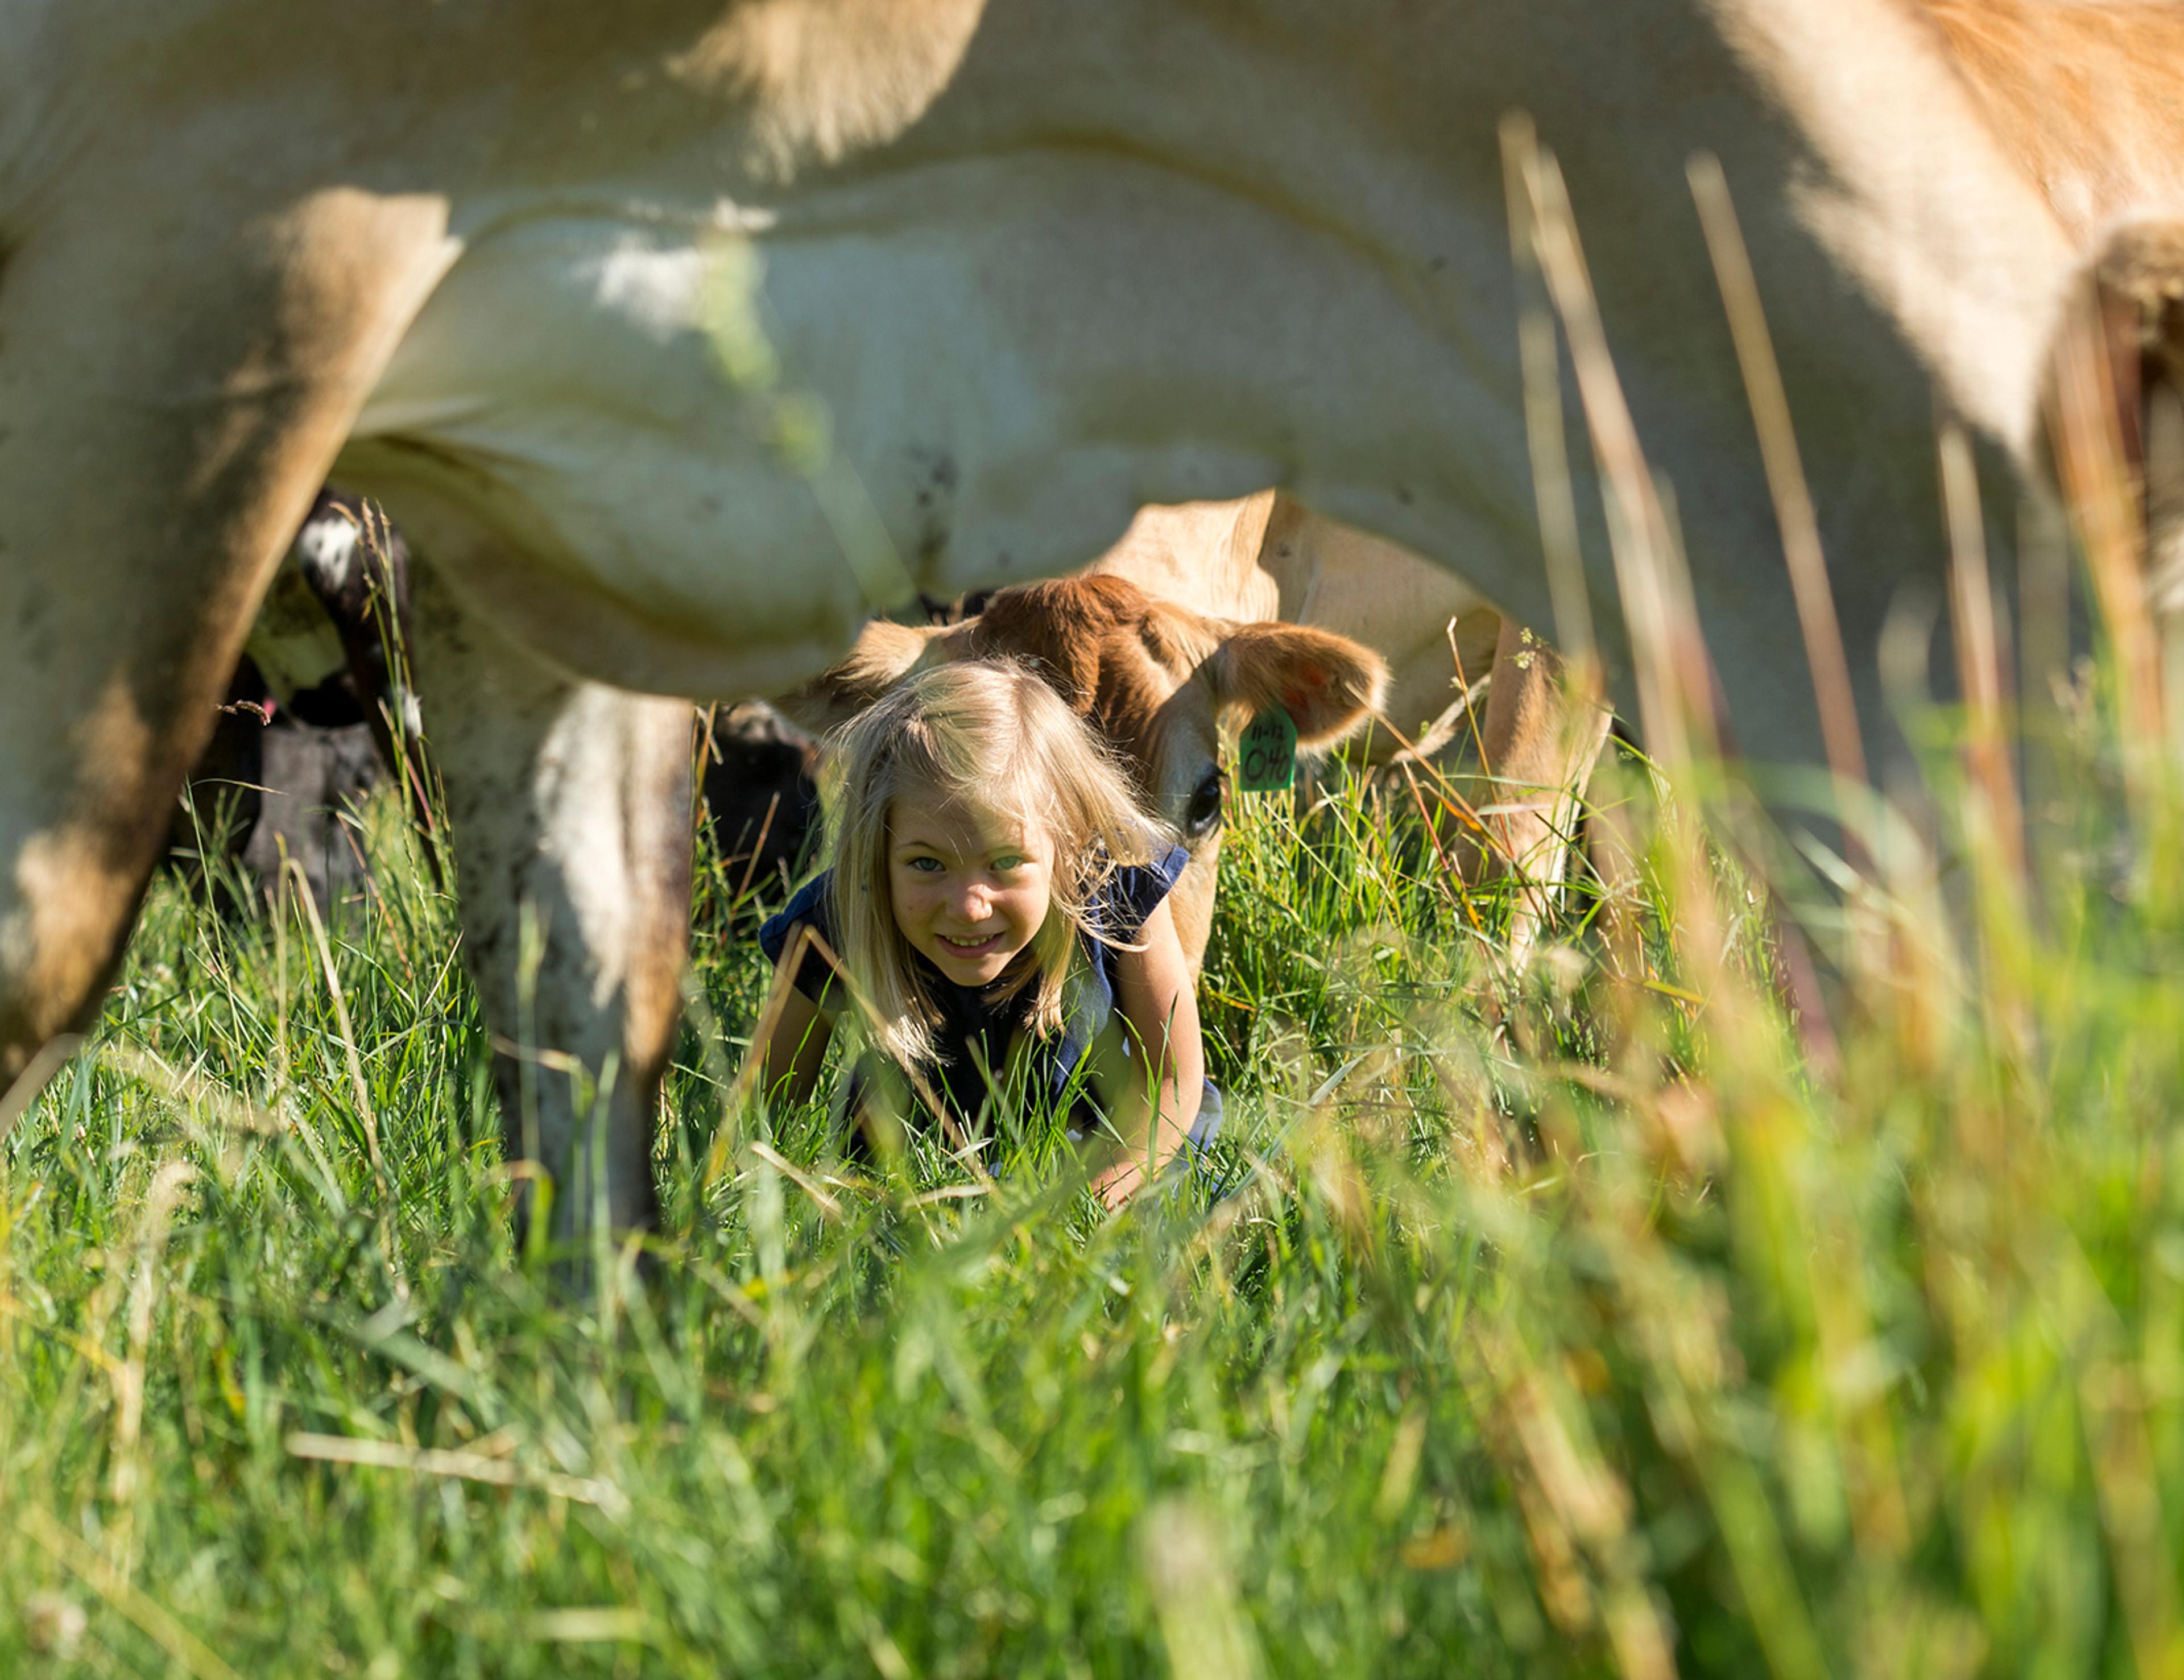 Little girl peeks out from under a cow in a grassy field.